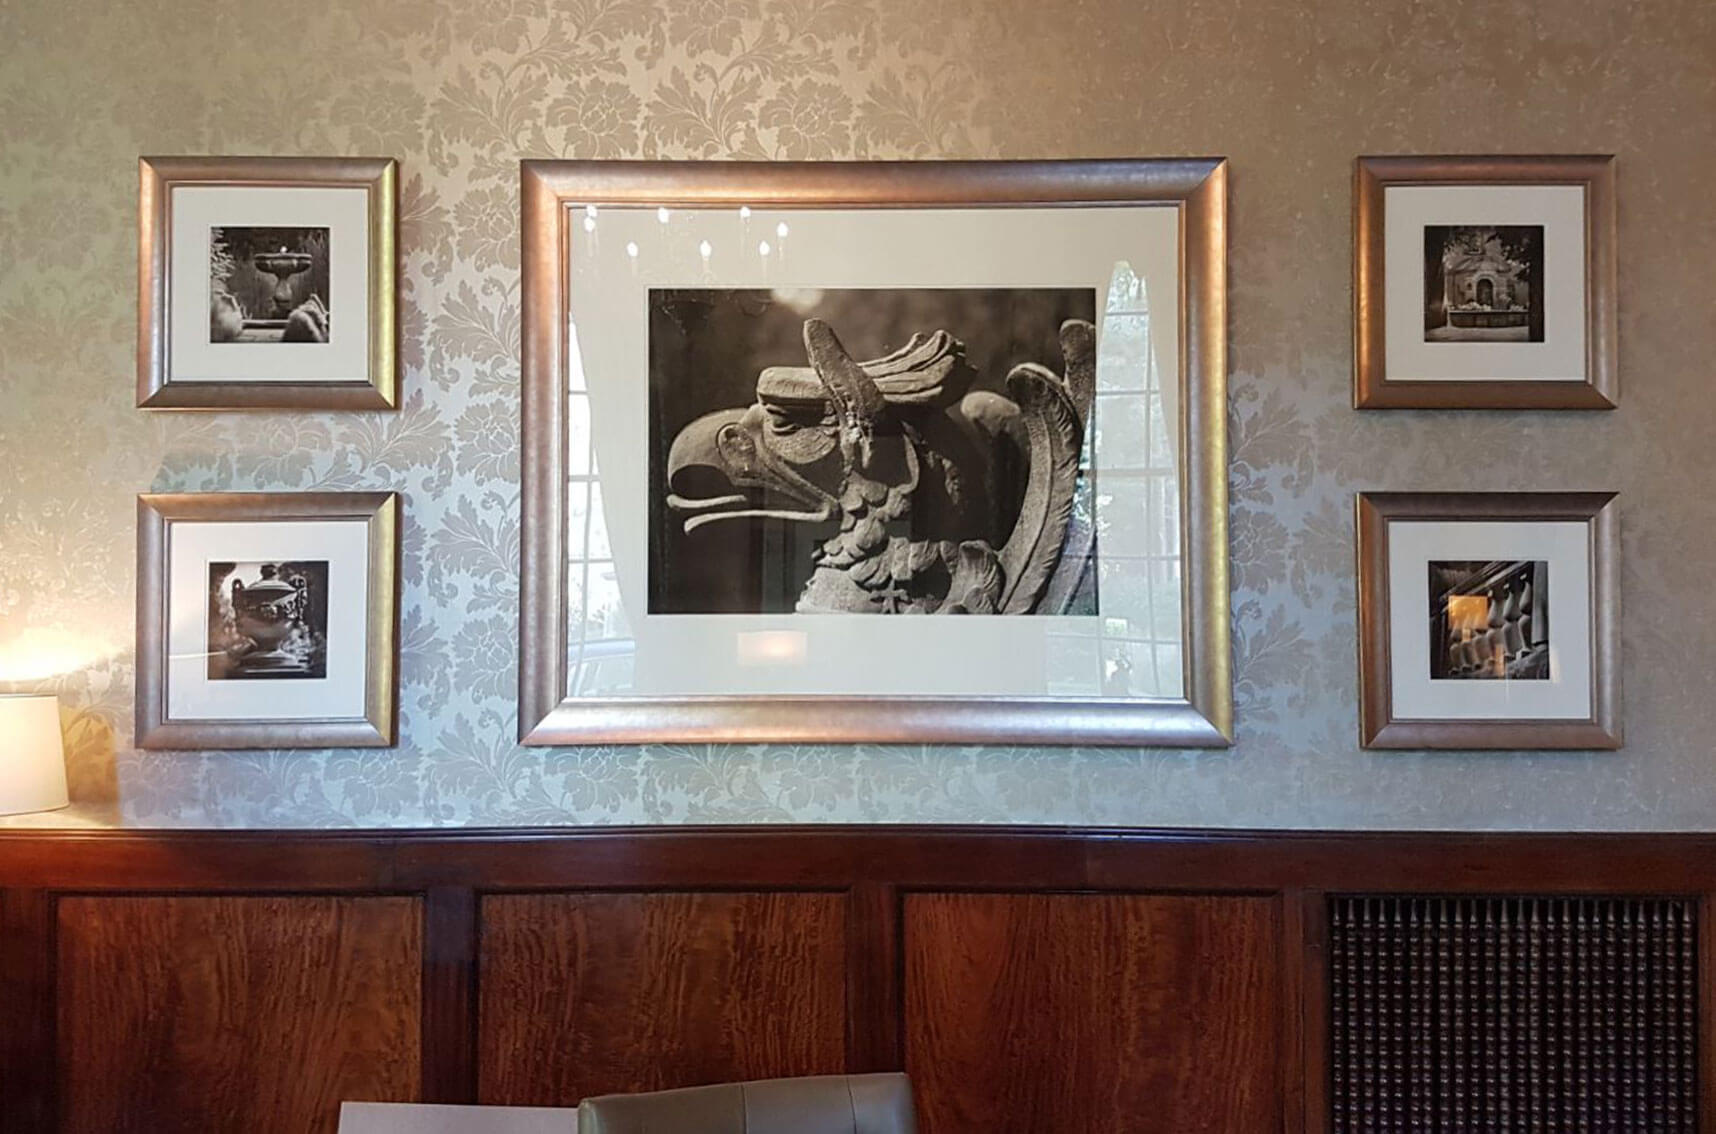 Crathorne Hall Hotel, Yorkshire, photography, photographer, black and white, black and white photography, framed photographs, framed artwork, framed digital images, framed art, bespoke, commissioned artwork, contemporary, contemporary art